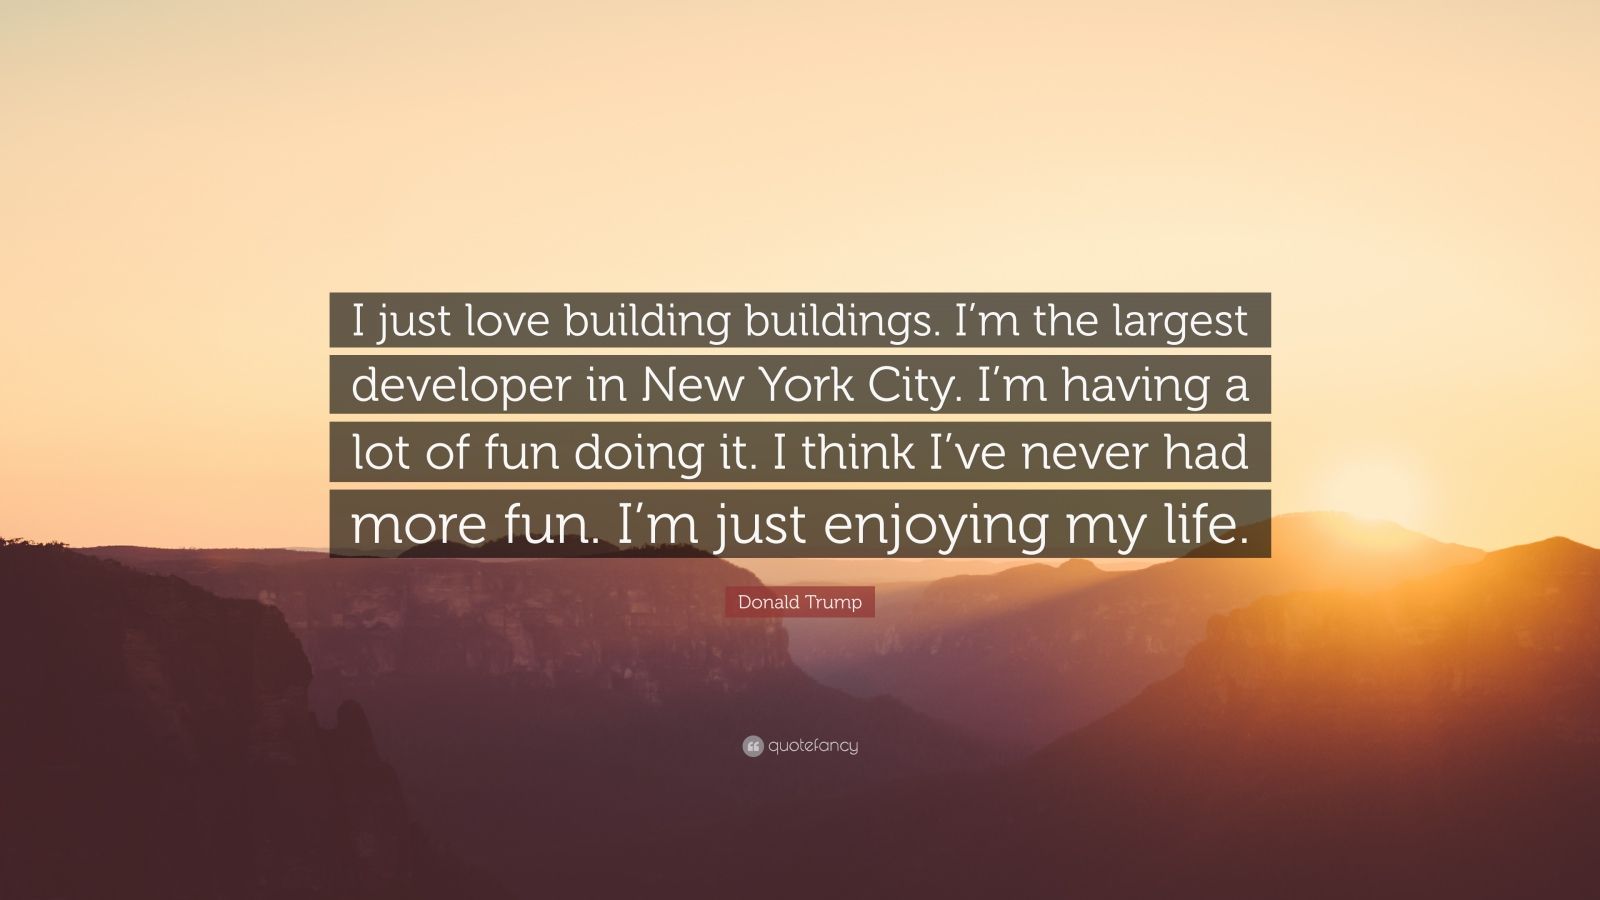 Donald Trump Quote “I just love building buildings I m the largest